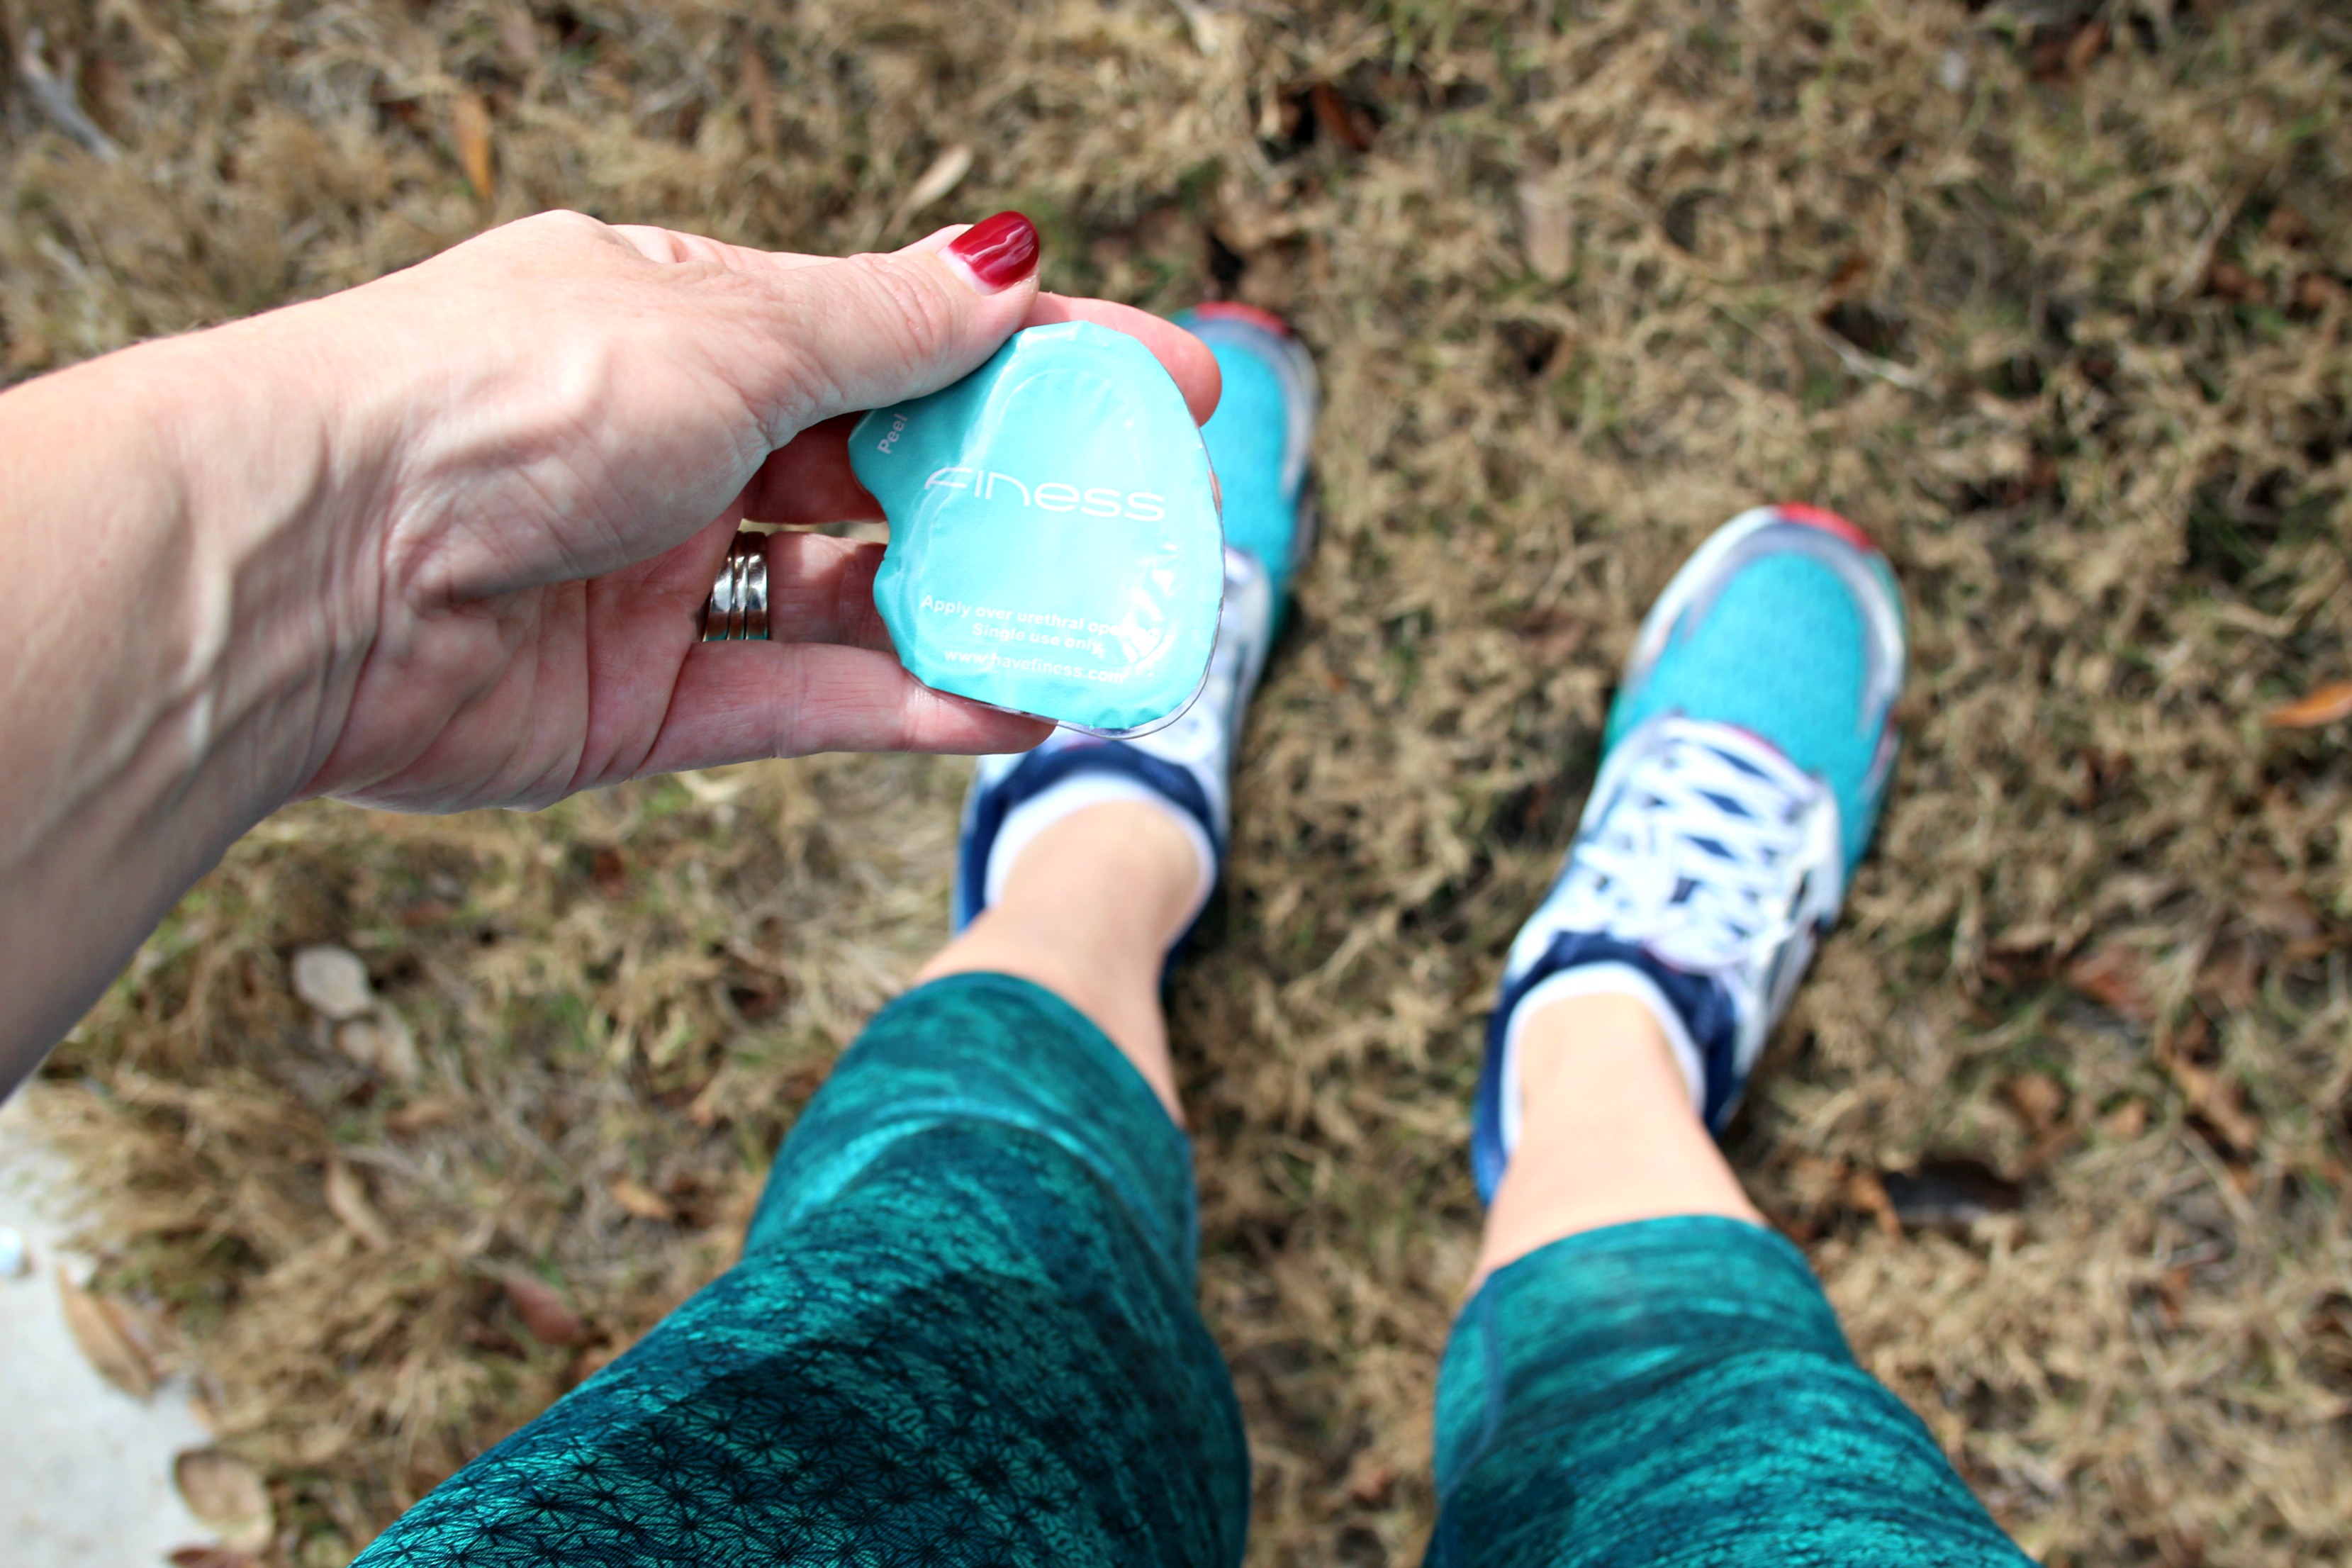 Running Tips for Moms|Ripped Jeans and Bifocals